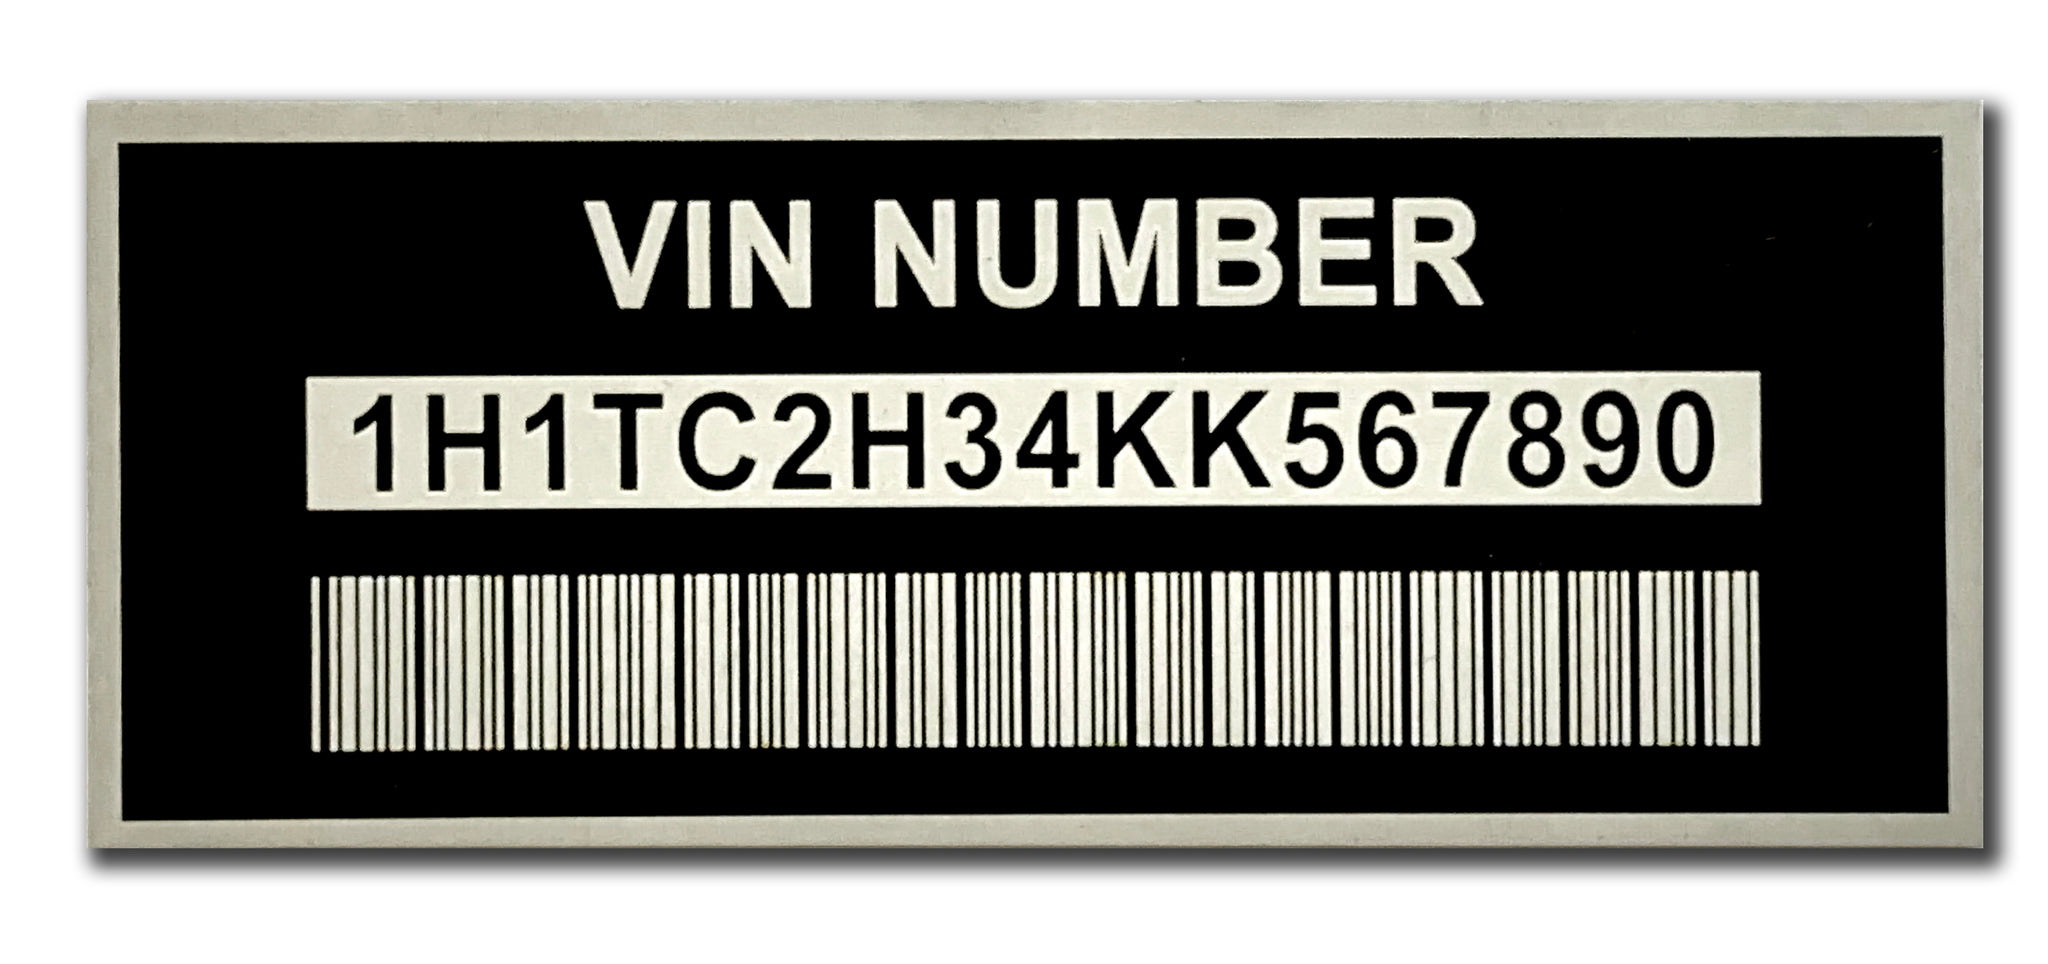 What Is a Vehicle Identification Number (VIN)?